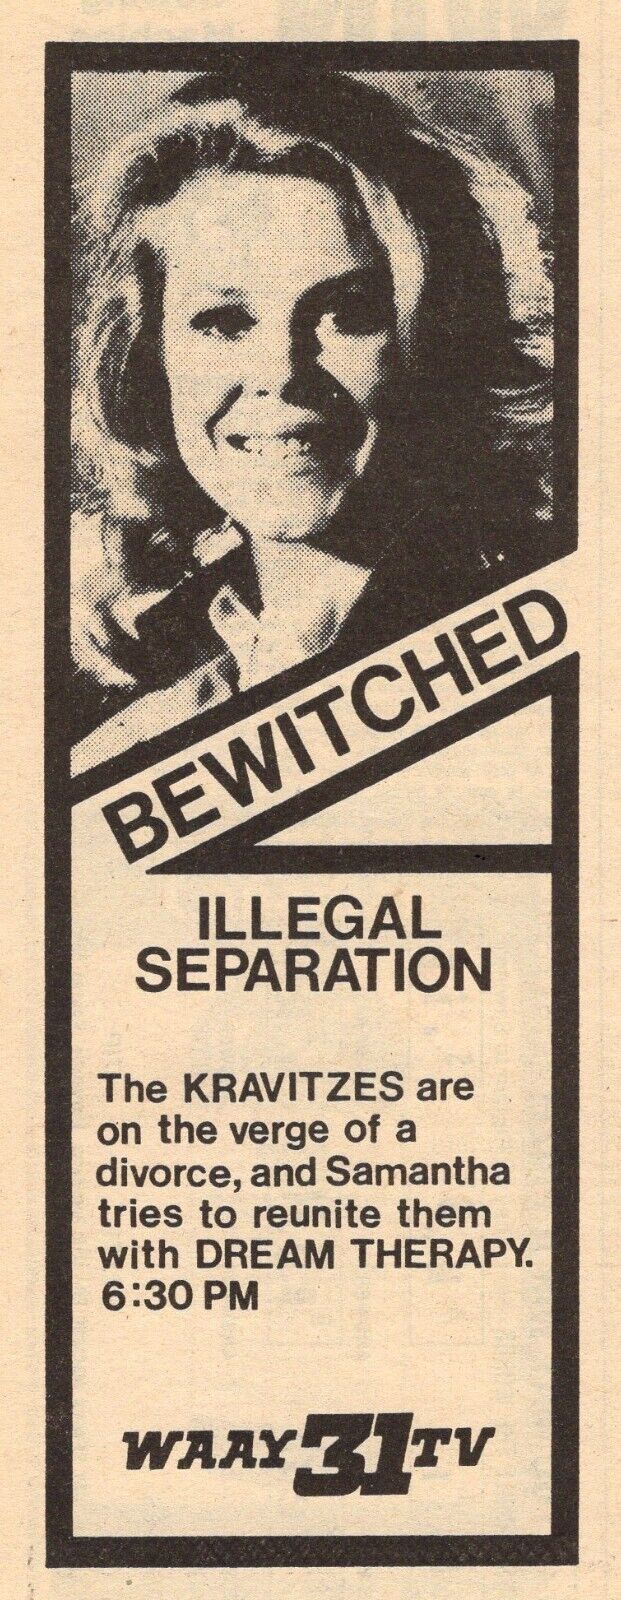 1977 WAAY ALABAMA TV AD ~ BEWITCHED EPISODE ILLEGAL SEPARATION ~ LIZ MONTGOMERY